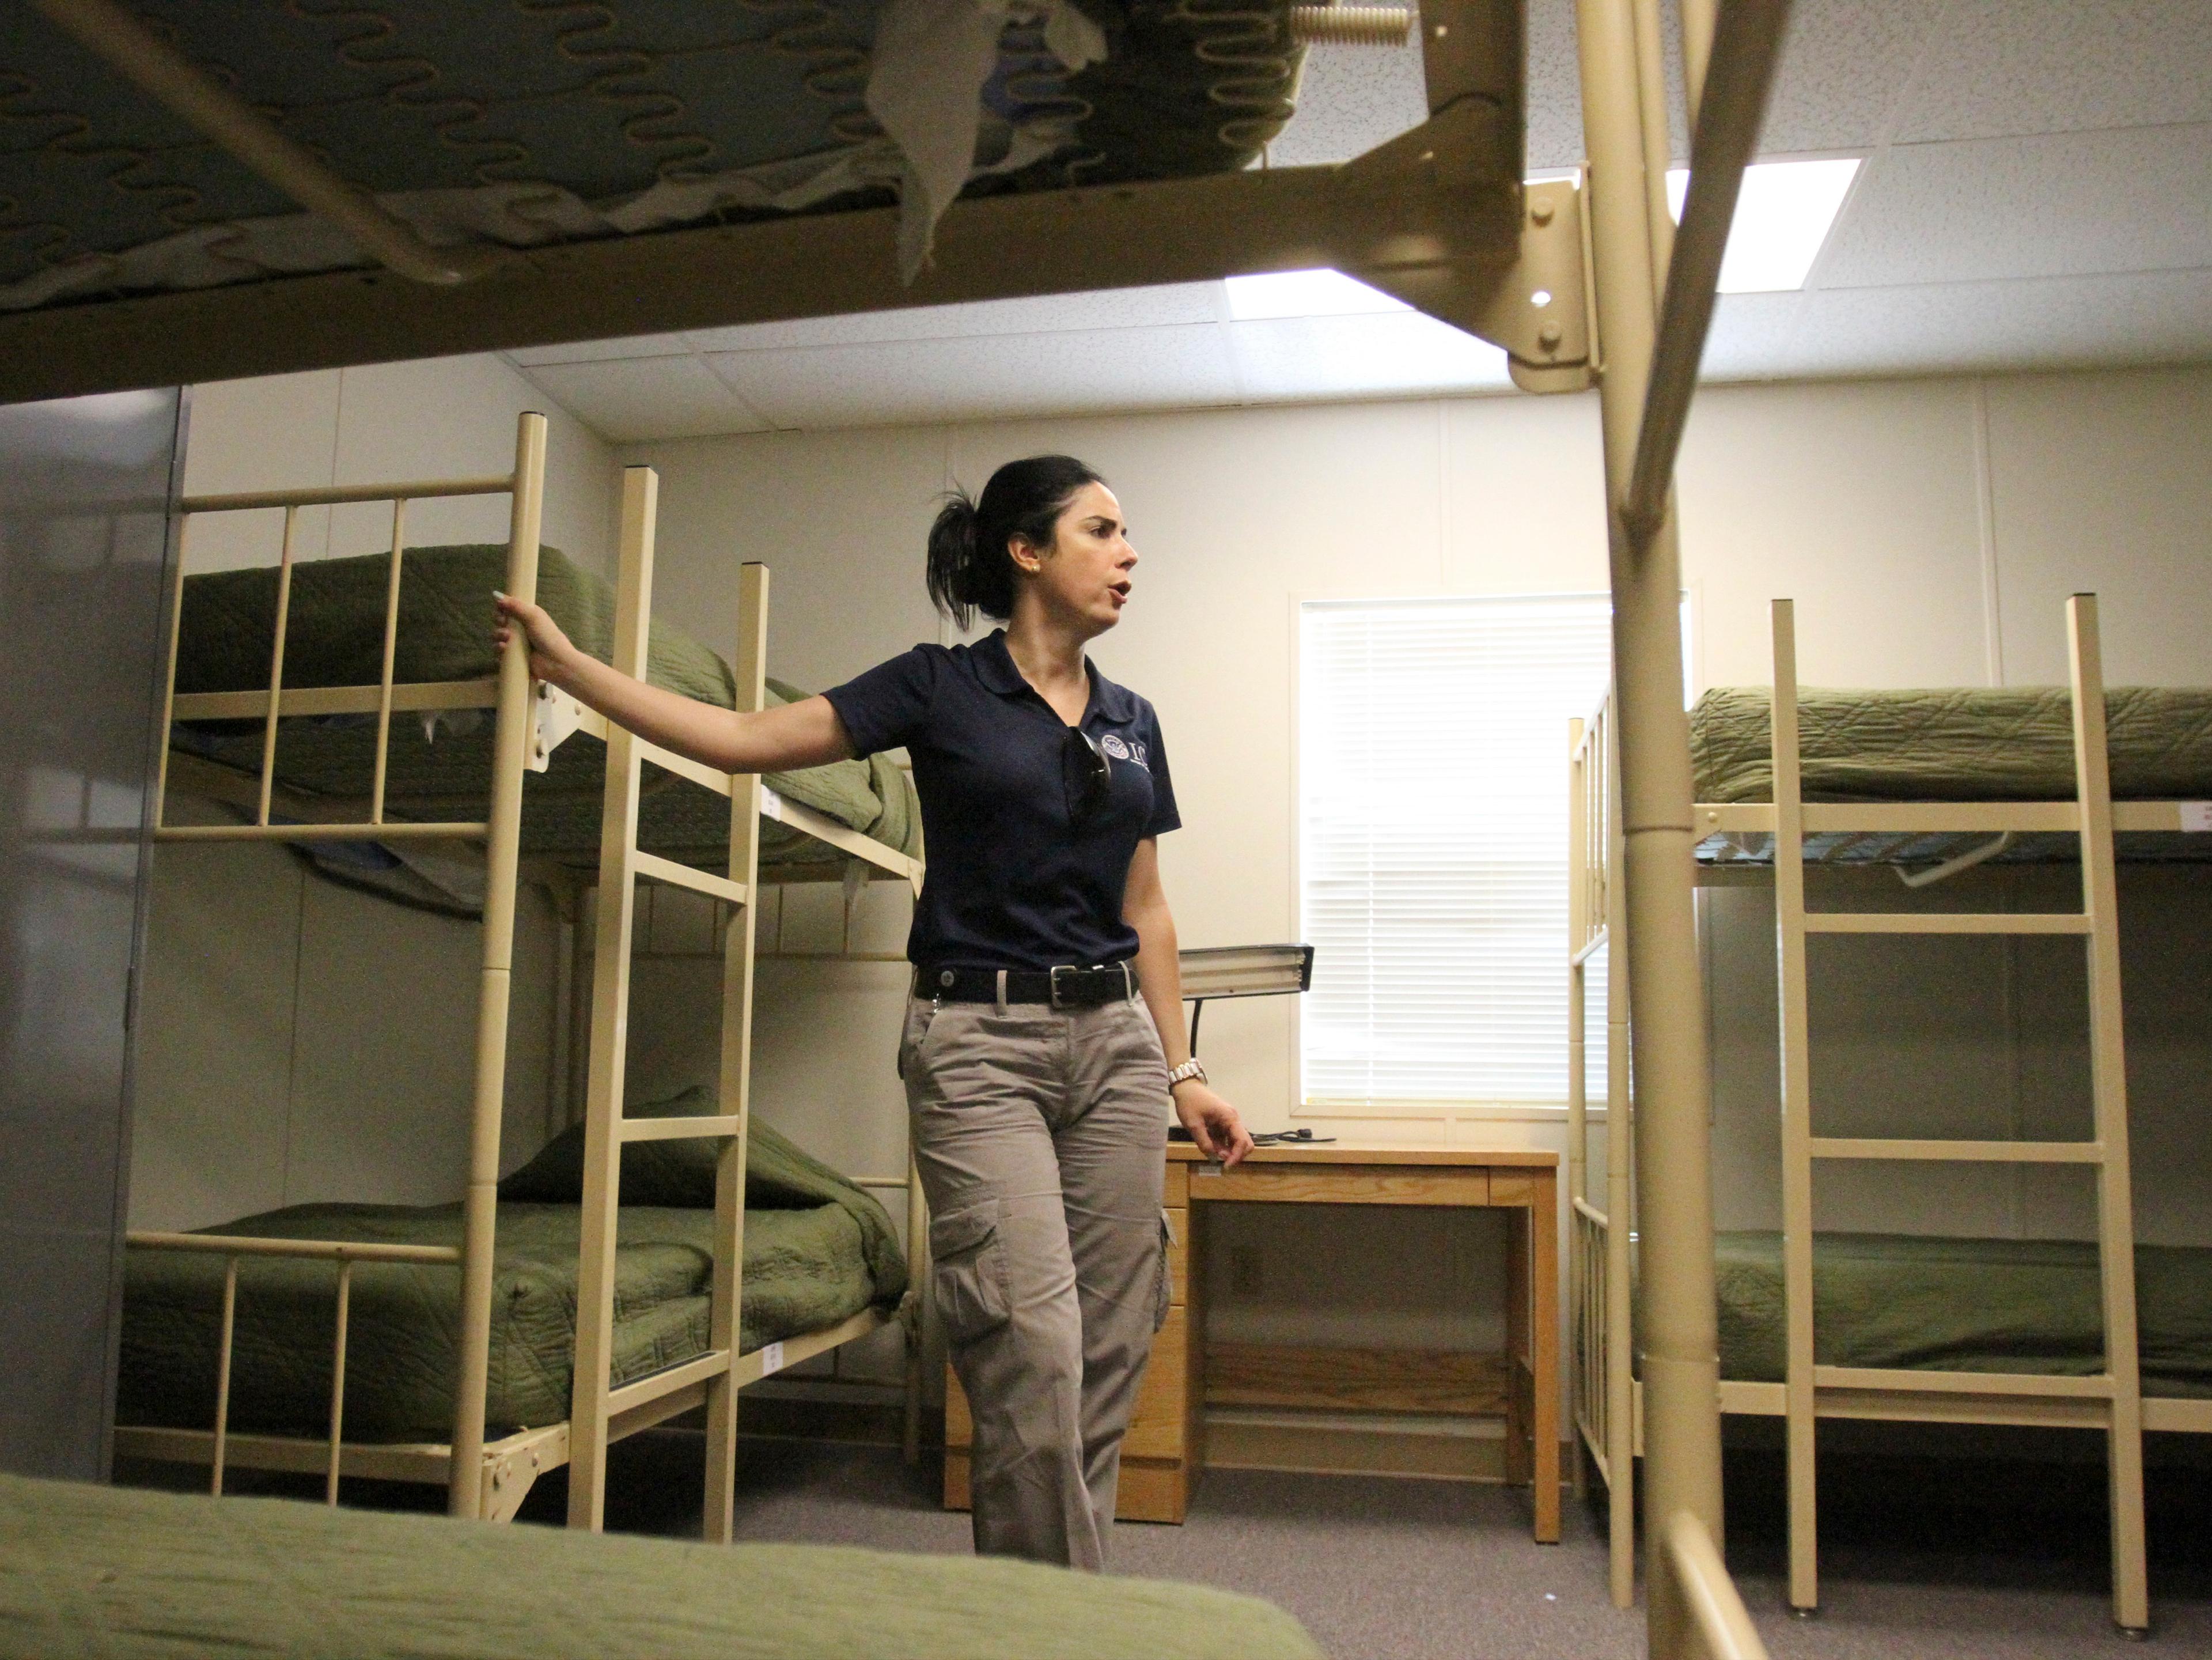 Photo: Dormitory for immigrant families in New Mexico